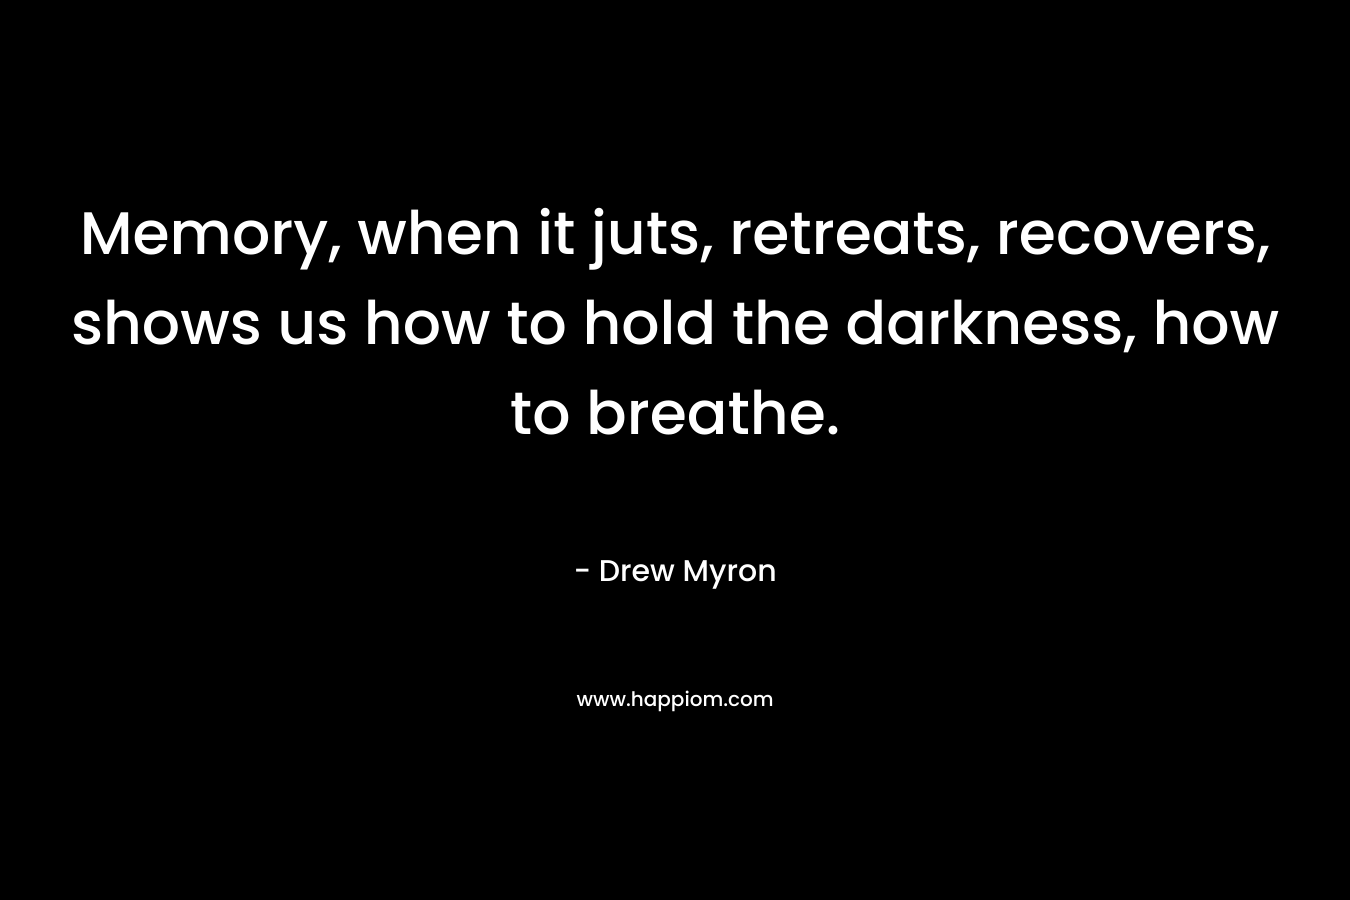 Memory, when it juts, retreats, recovers, shows us how to hold the darkness, how to breathe. – Drew Myron